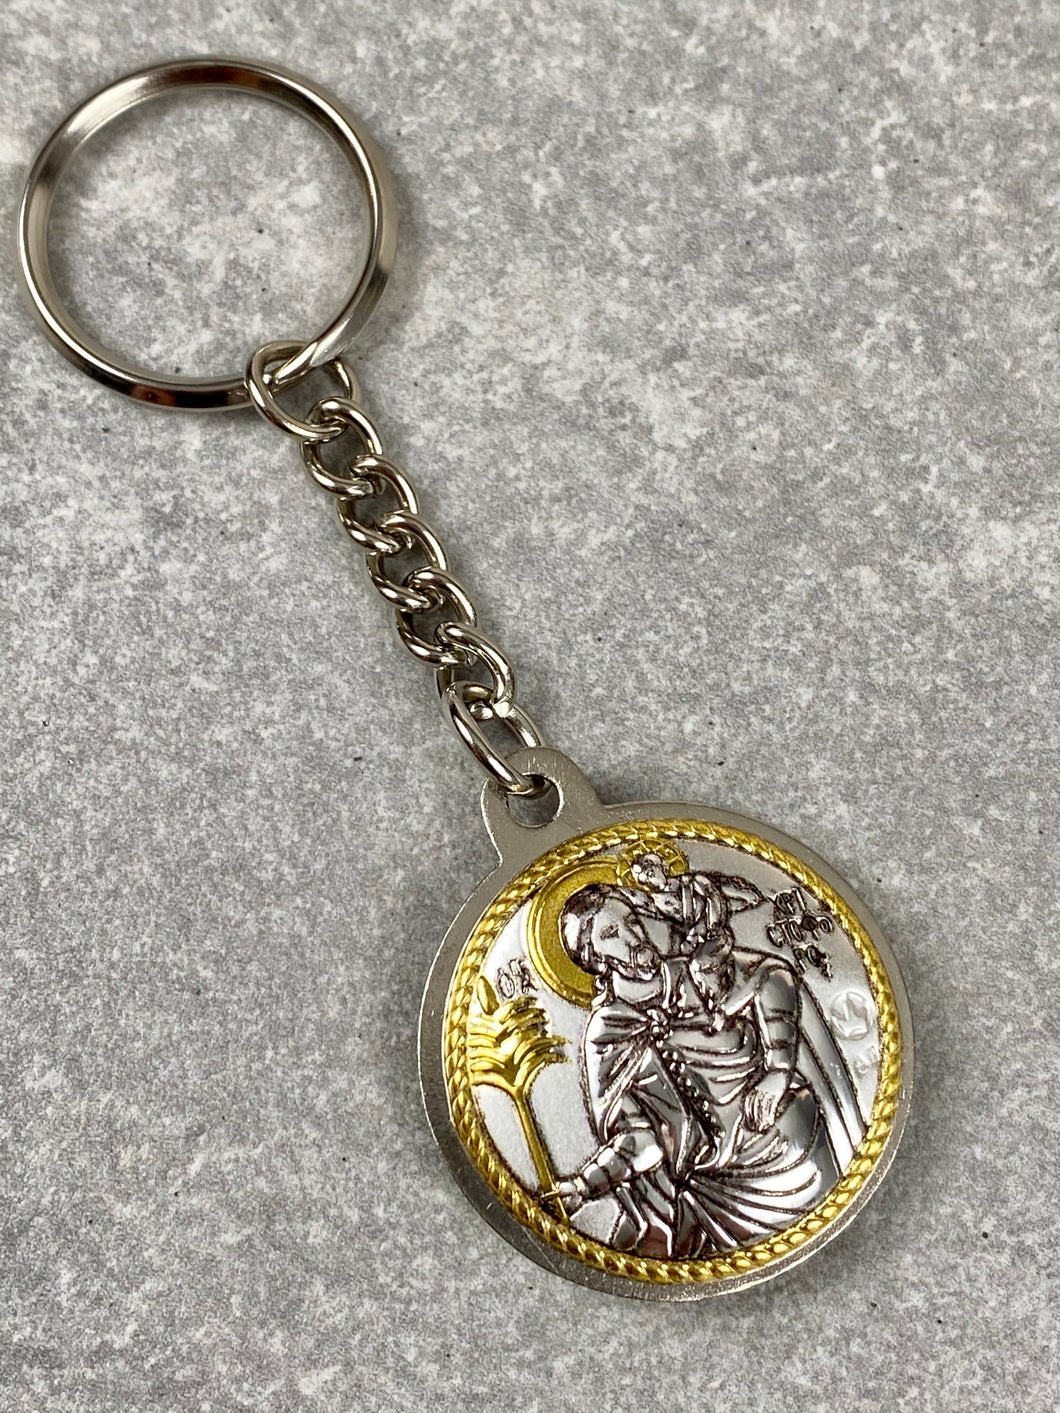 925* Silver Double Sided Ag. Christoforos and Panagia Keychain RK8